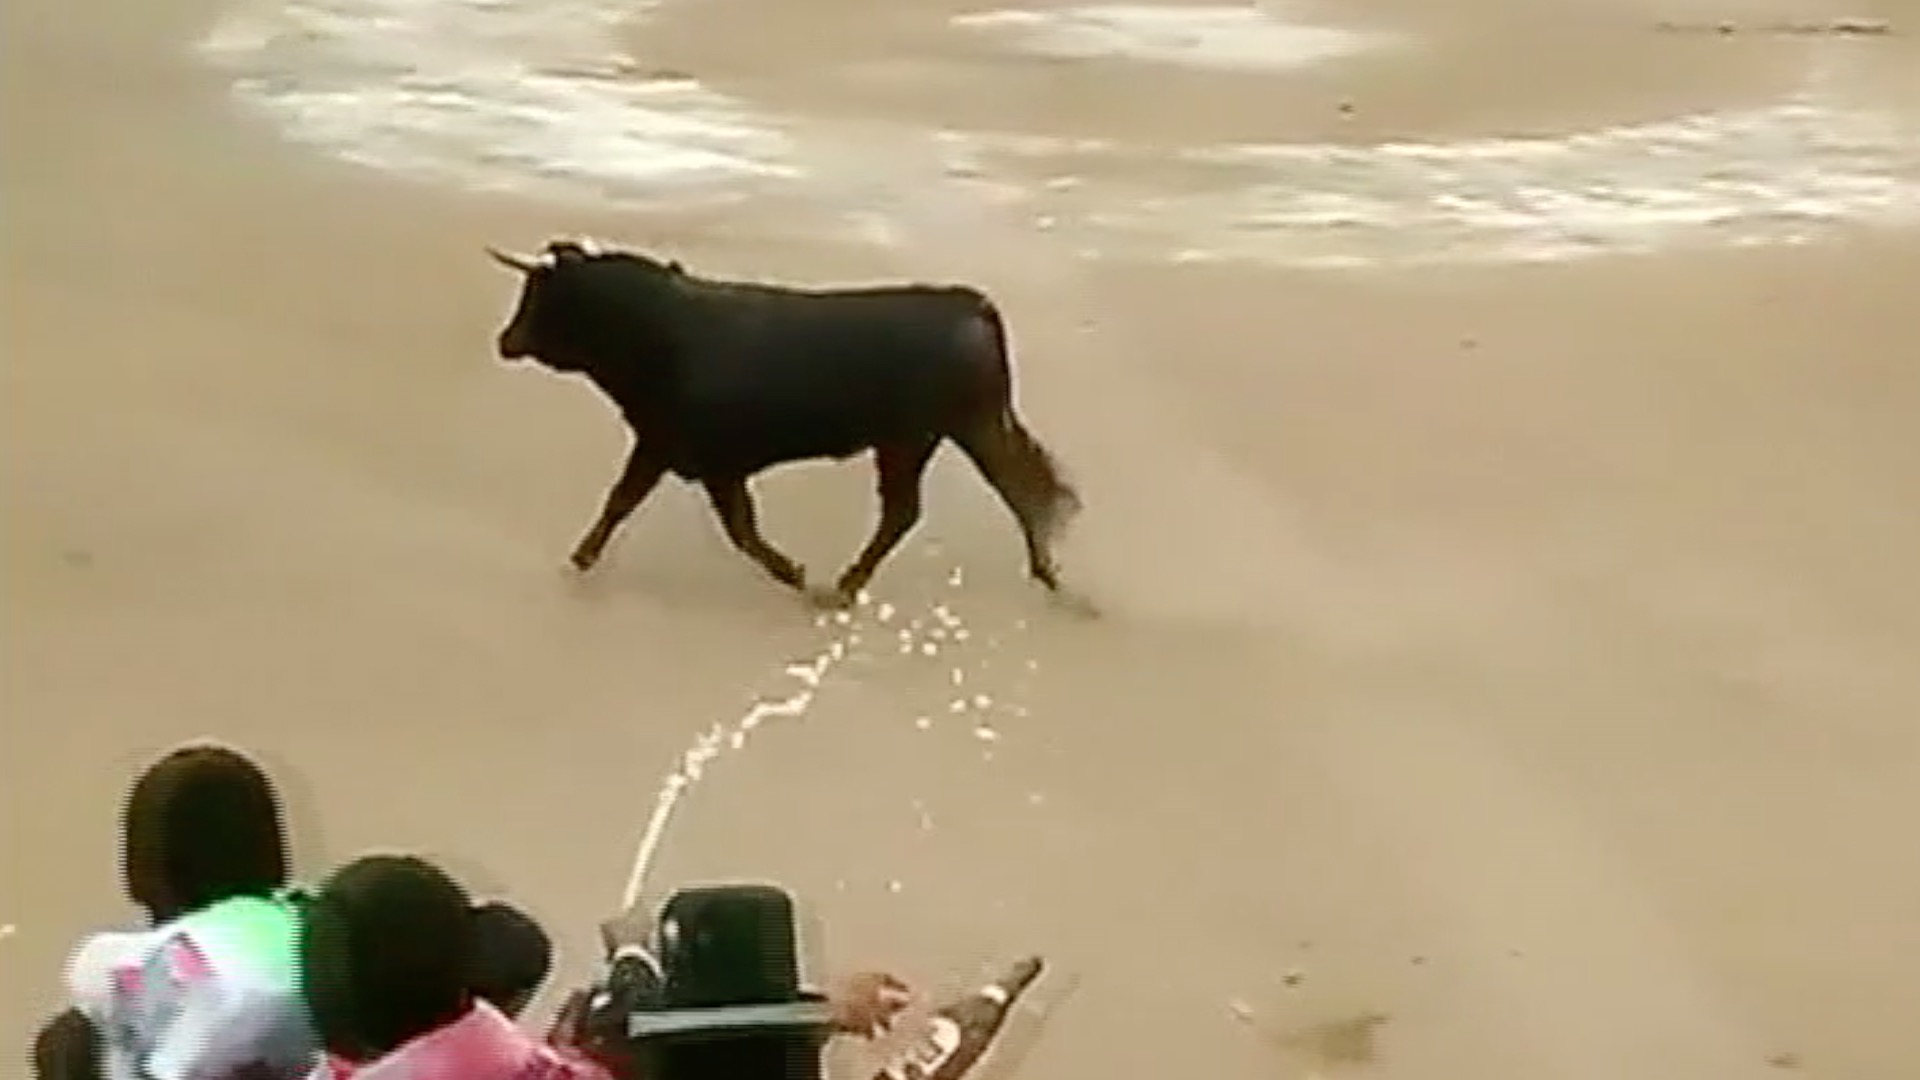 Terrifying moment bull jumps into crowd in Peru